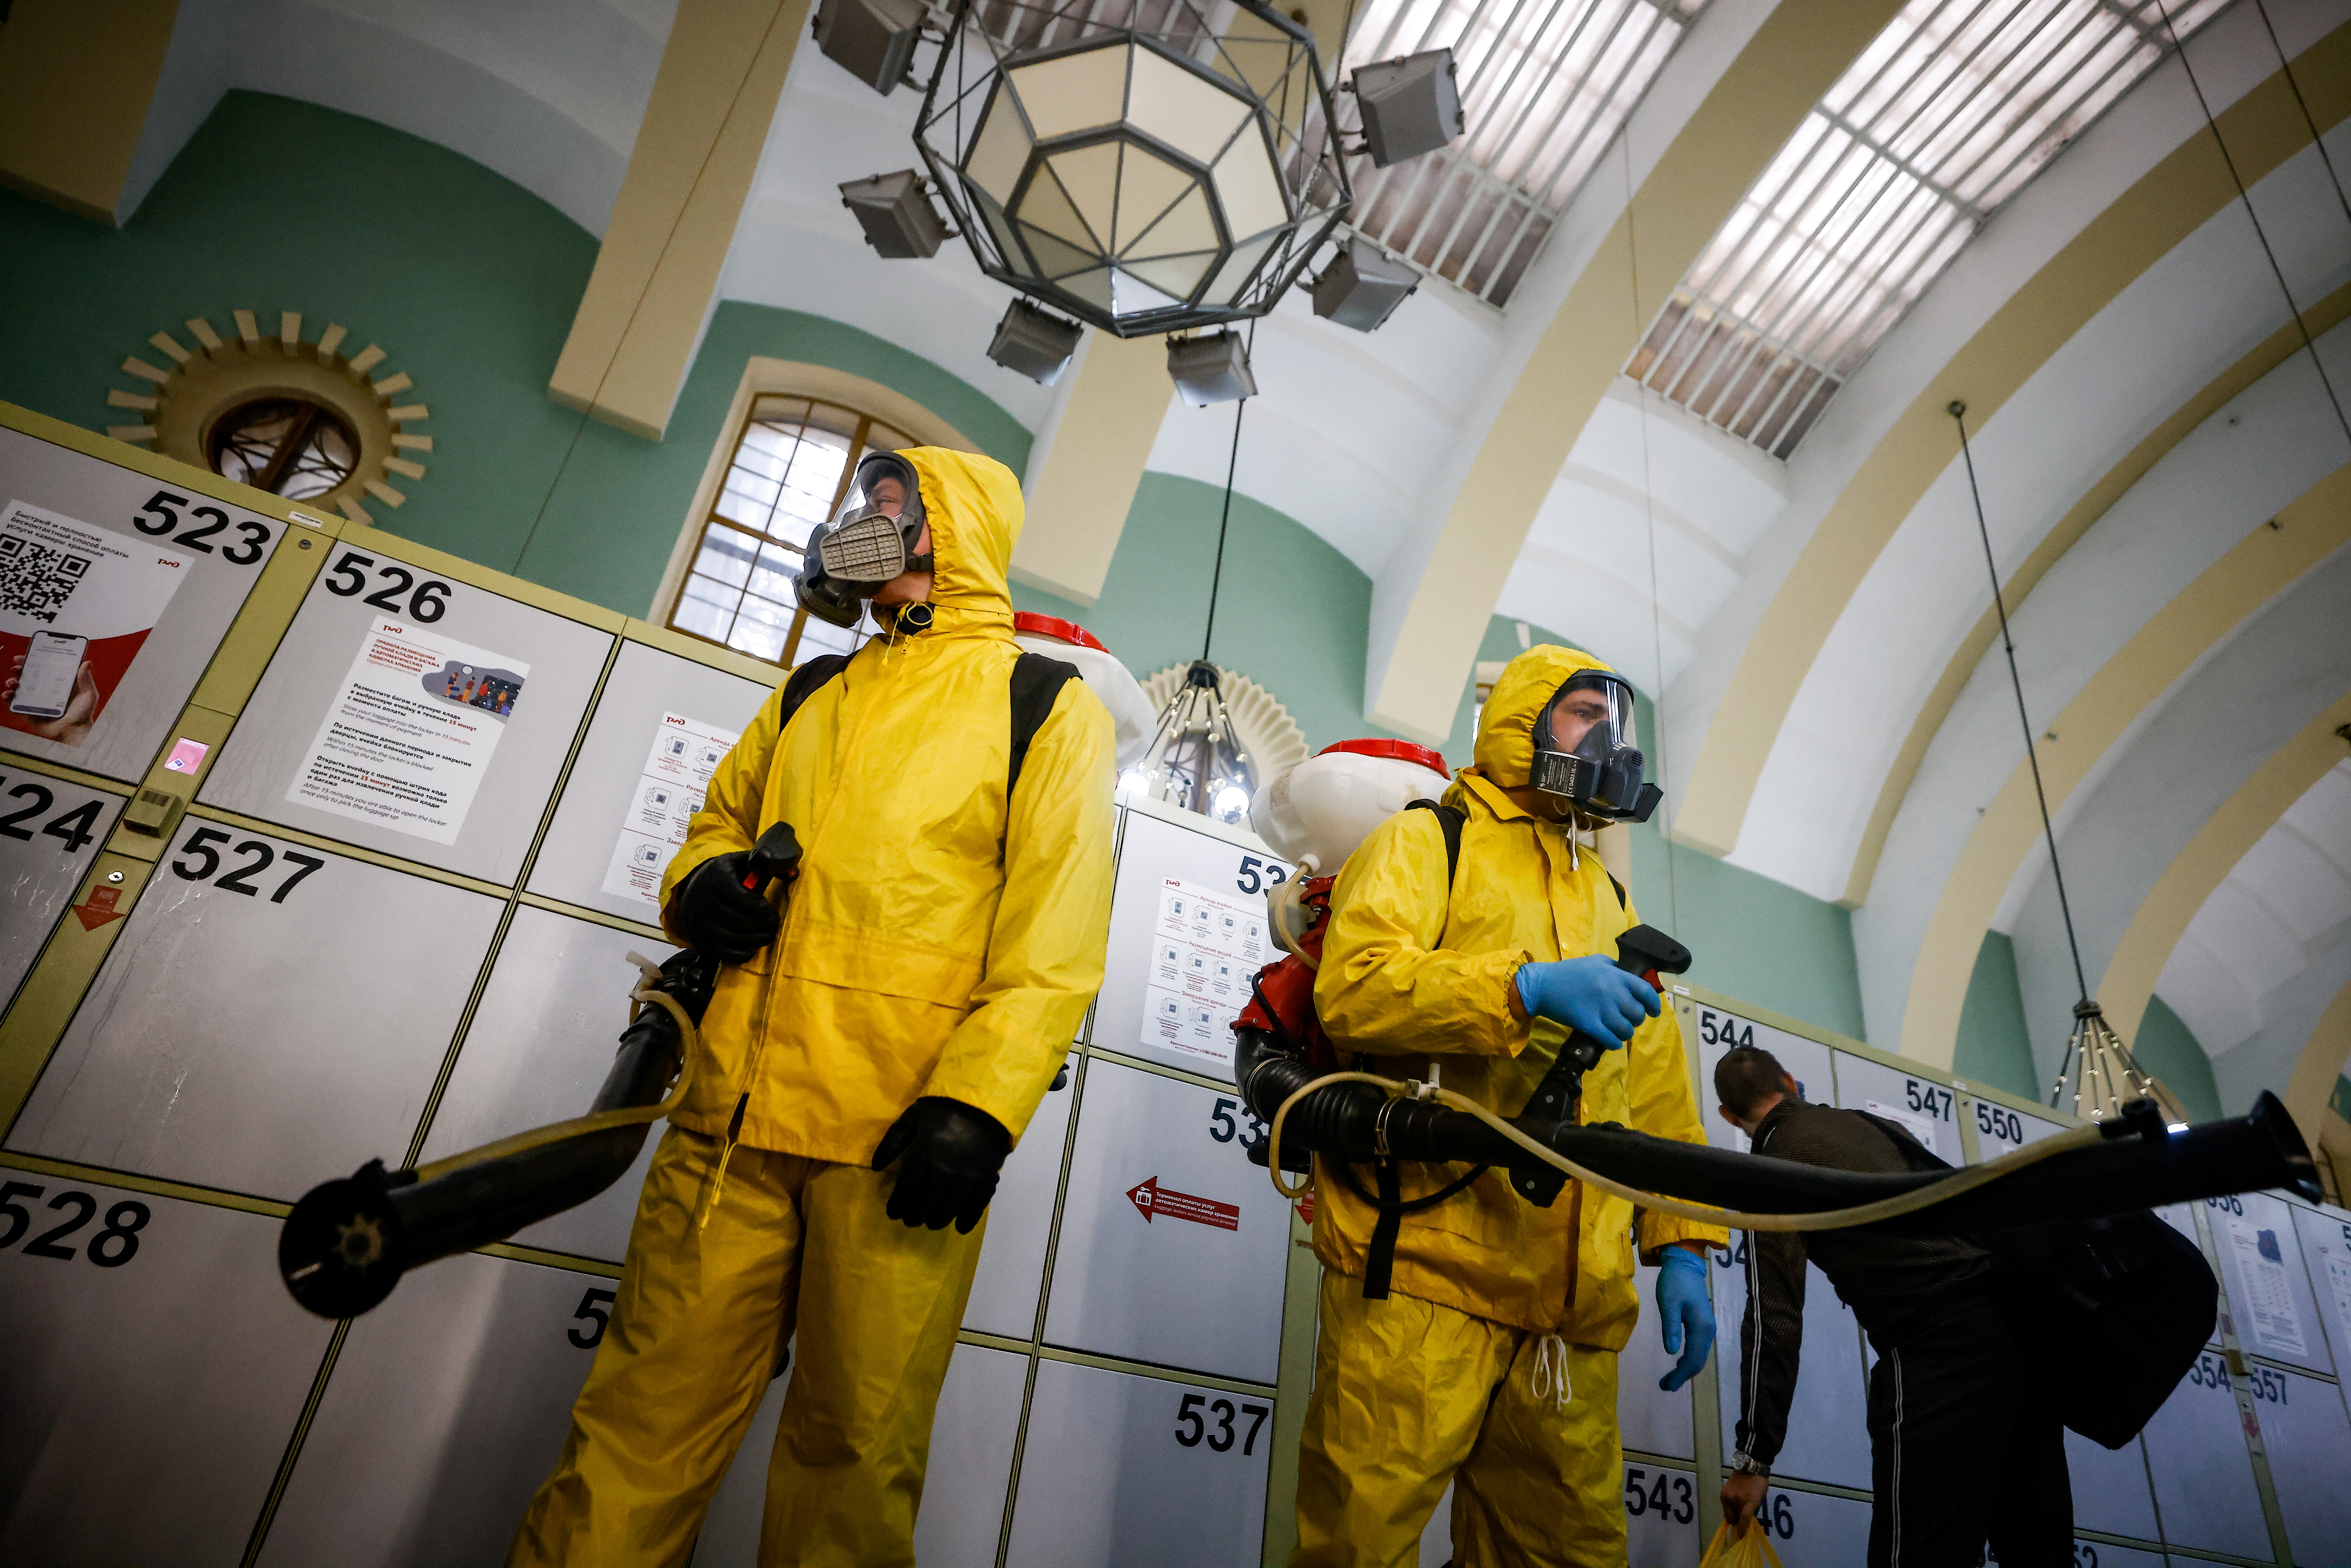 Specialists wearing personal protective equipment (PPE) spray disinfectant while sanitizing the Kazansky railway station amid the outbreak of the coronavirus disease (COVID-19) in Moscow, Russia November 2, 2021. REUTERS/Maxim Shemetov